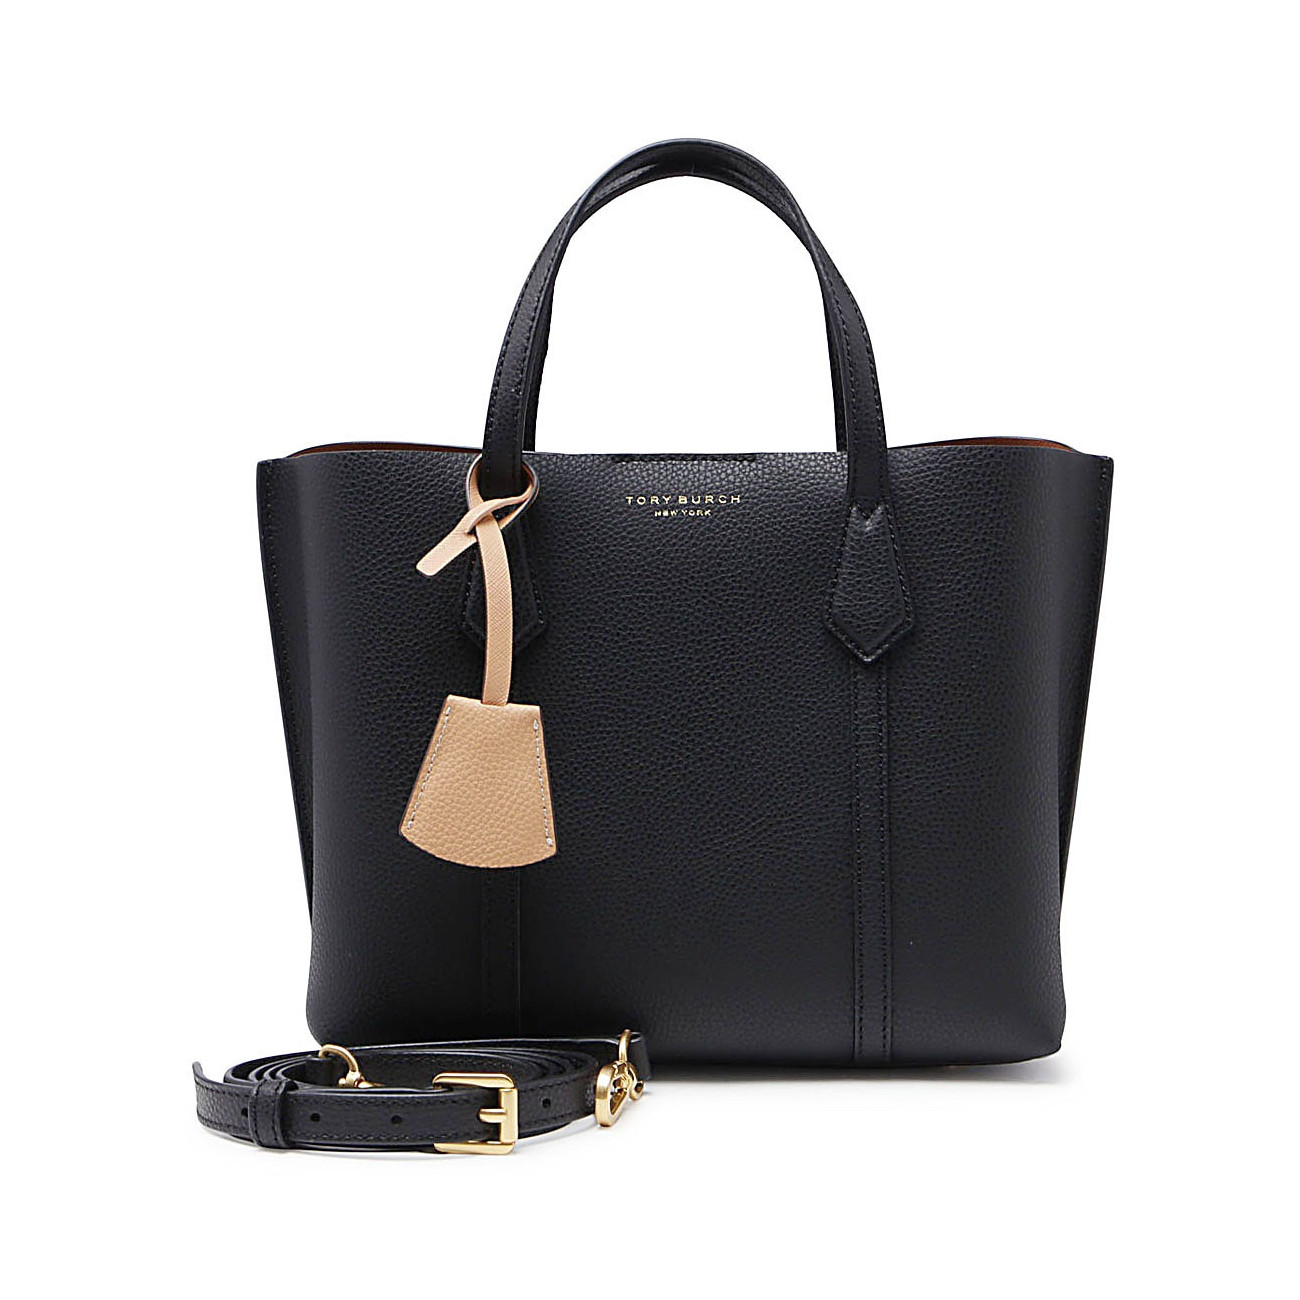 BLACK LEATHER SMALL PERRY TOTE BAG